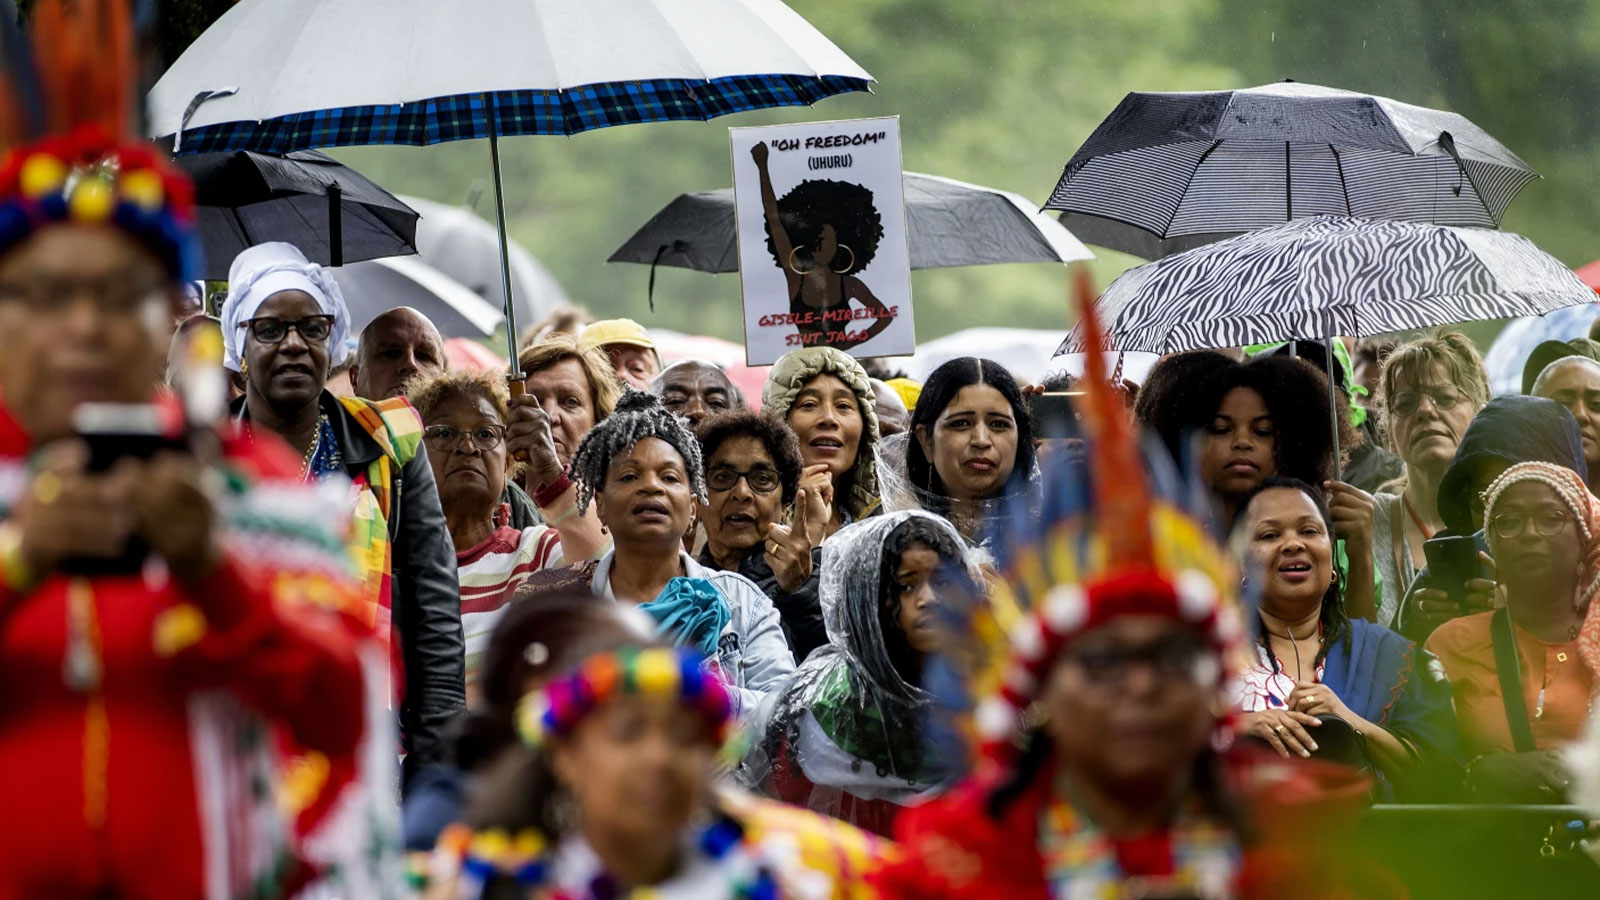 Spectators listen to Dutch King Willem-Alexander who apologized for the royal house’s role in slavery and asked forgiveness in a speech greeted by cheers and whoops at an event to commemorate the anniversary of the country abolishing slavery in Amsterdam, Netherlands, Saturday, July 1, 2023.